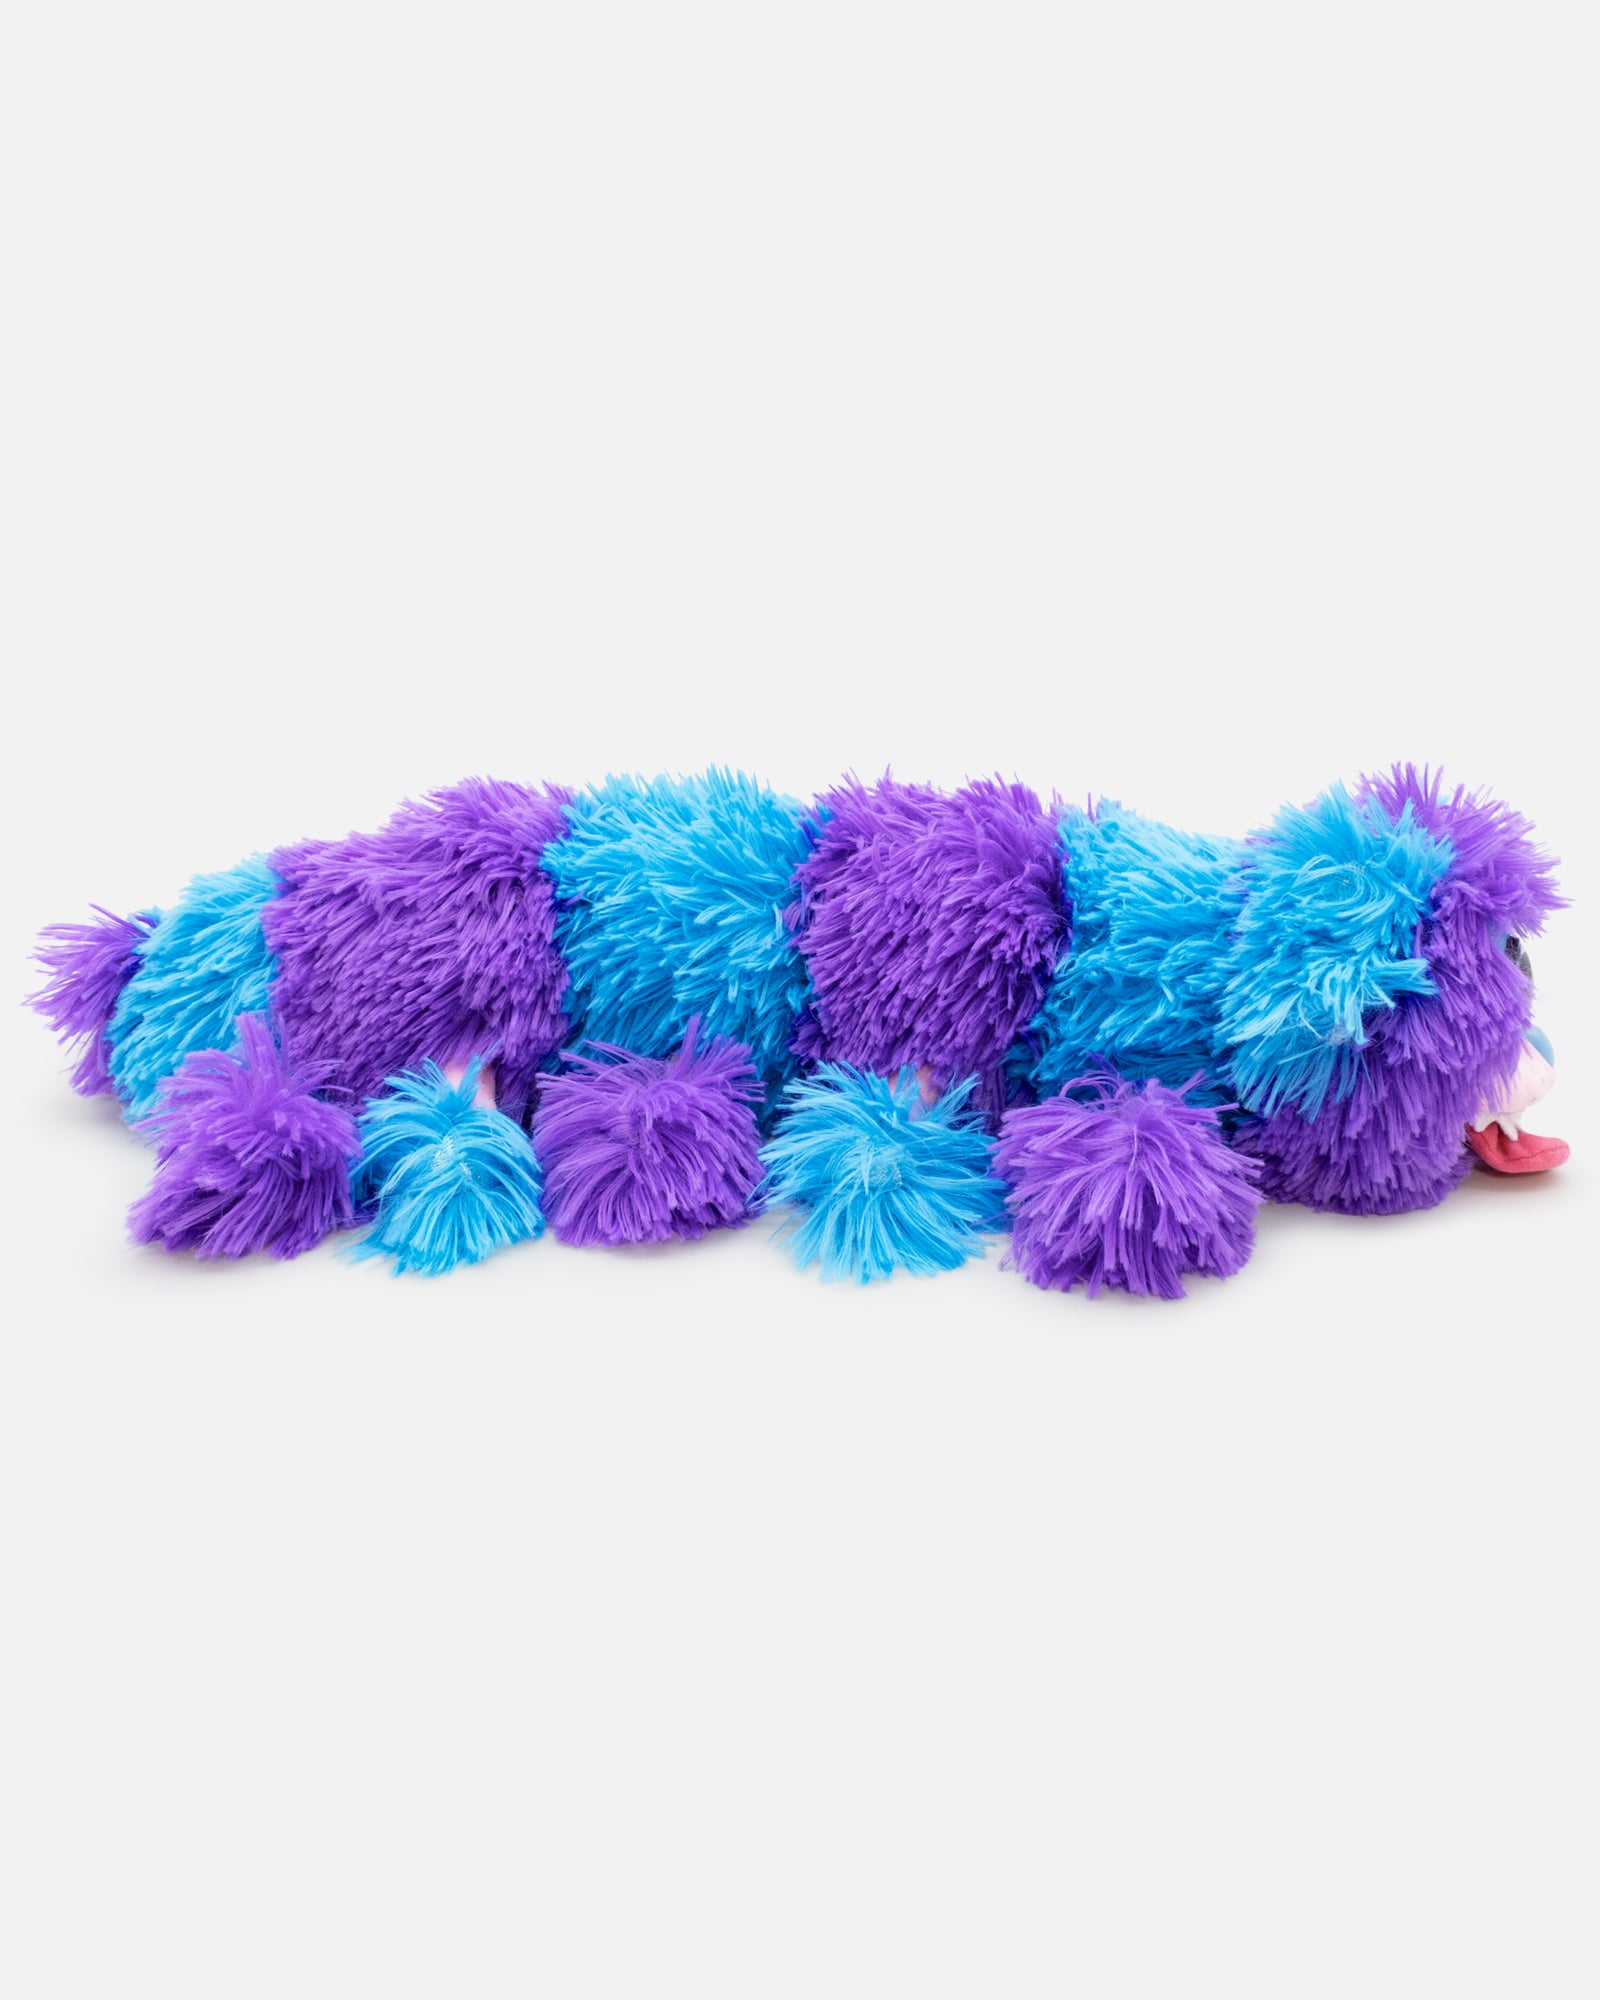 Buy Caterpillar PJ Pug a Pillar Poppy Playtime Huggy Wuggy Plush, Cartoon  Plushies Toy Realistic Monster Horror Stuffed Doll Gift for Game Fans  Online at Low Prices in India 